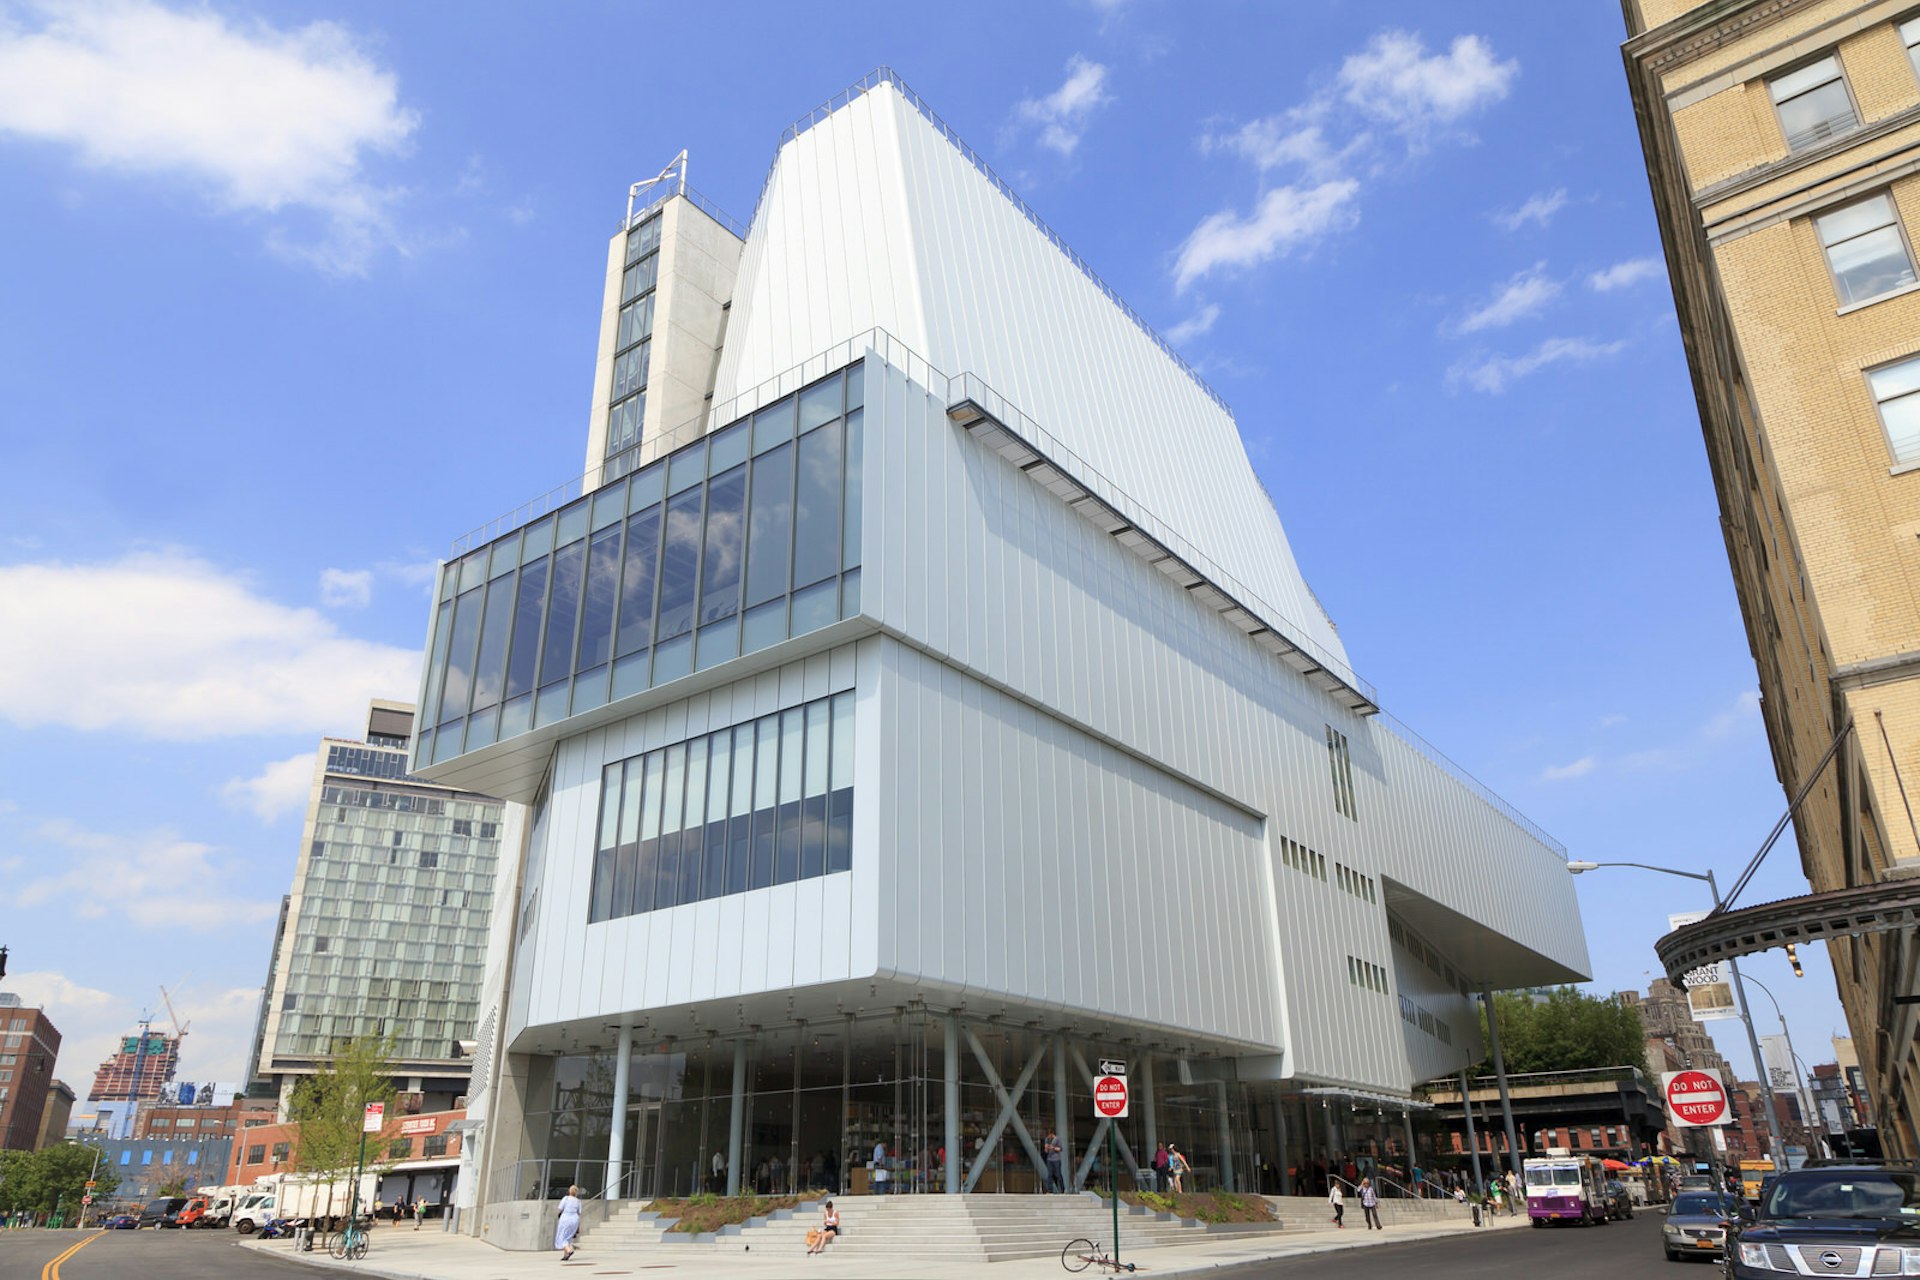 The Whitney occupies a prime spot in New York's fashionable Meatpacking District © Osugi / Shutterstock